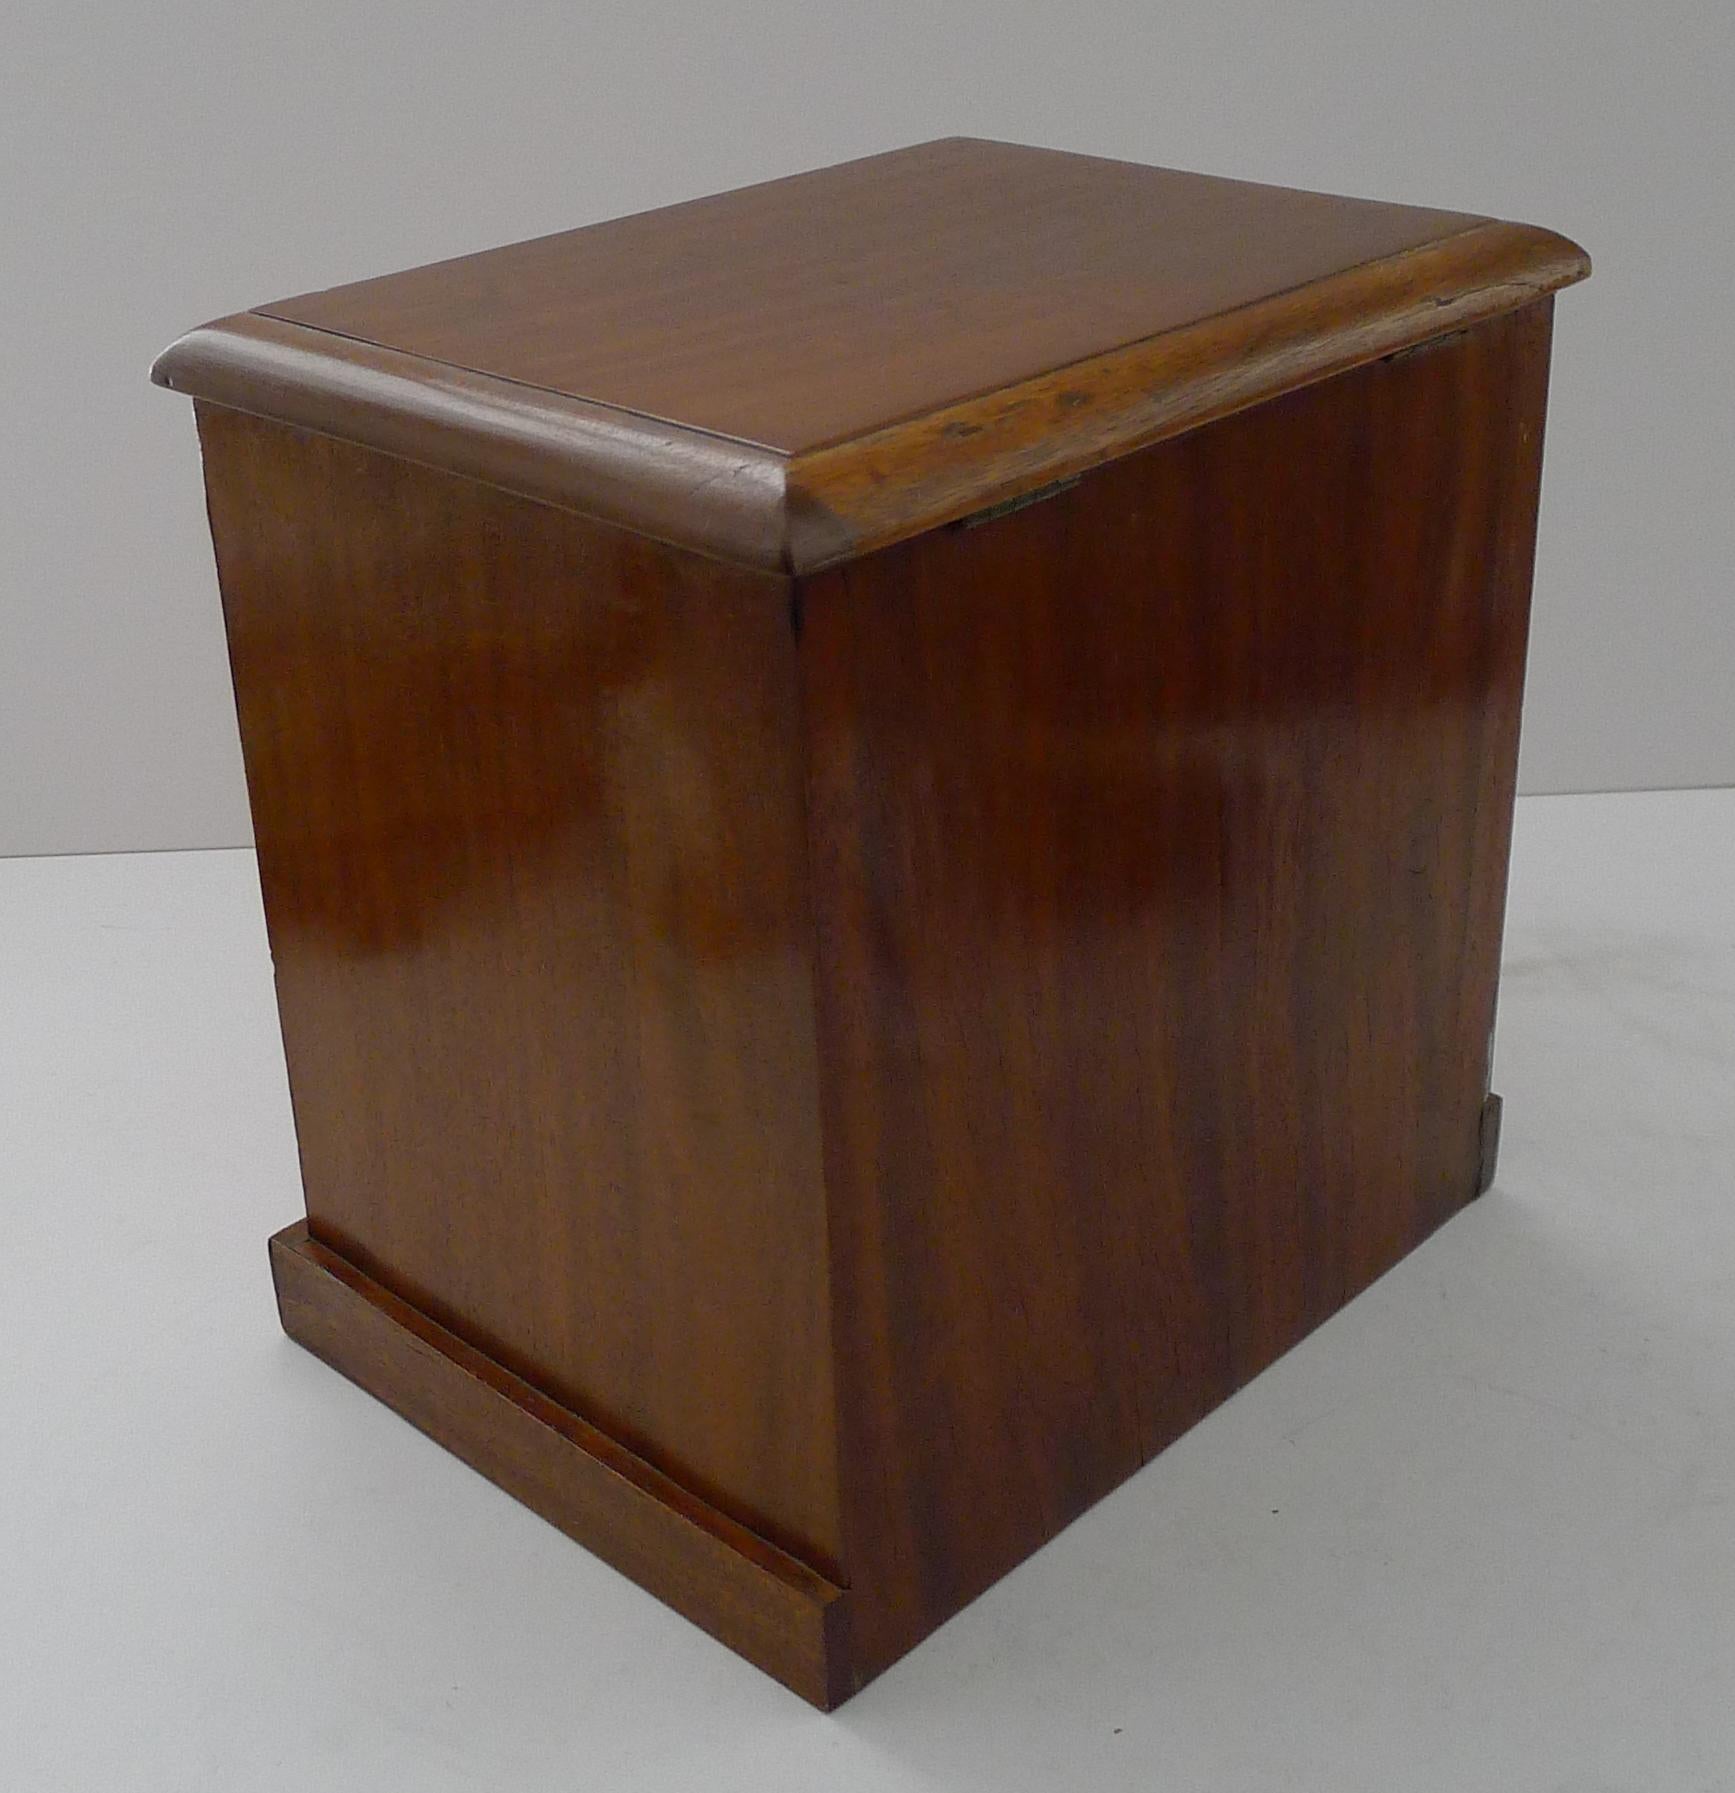 Wood Rare English Mahogany Tea Caddy - Form of Chest of Drawers c.1880 For Sale